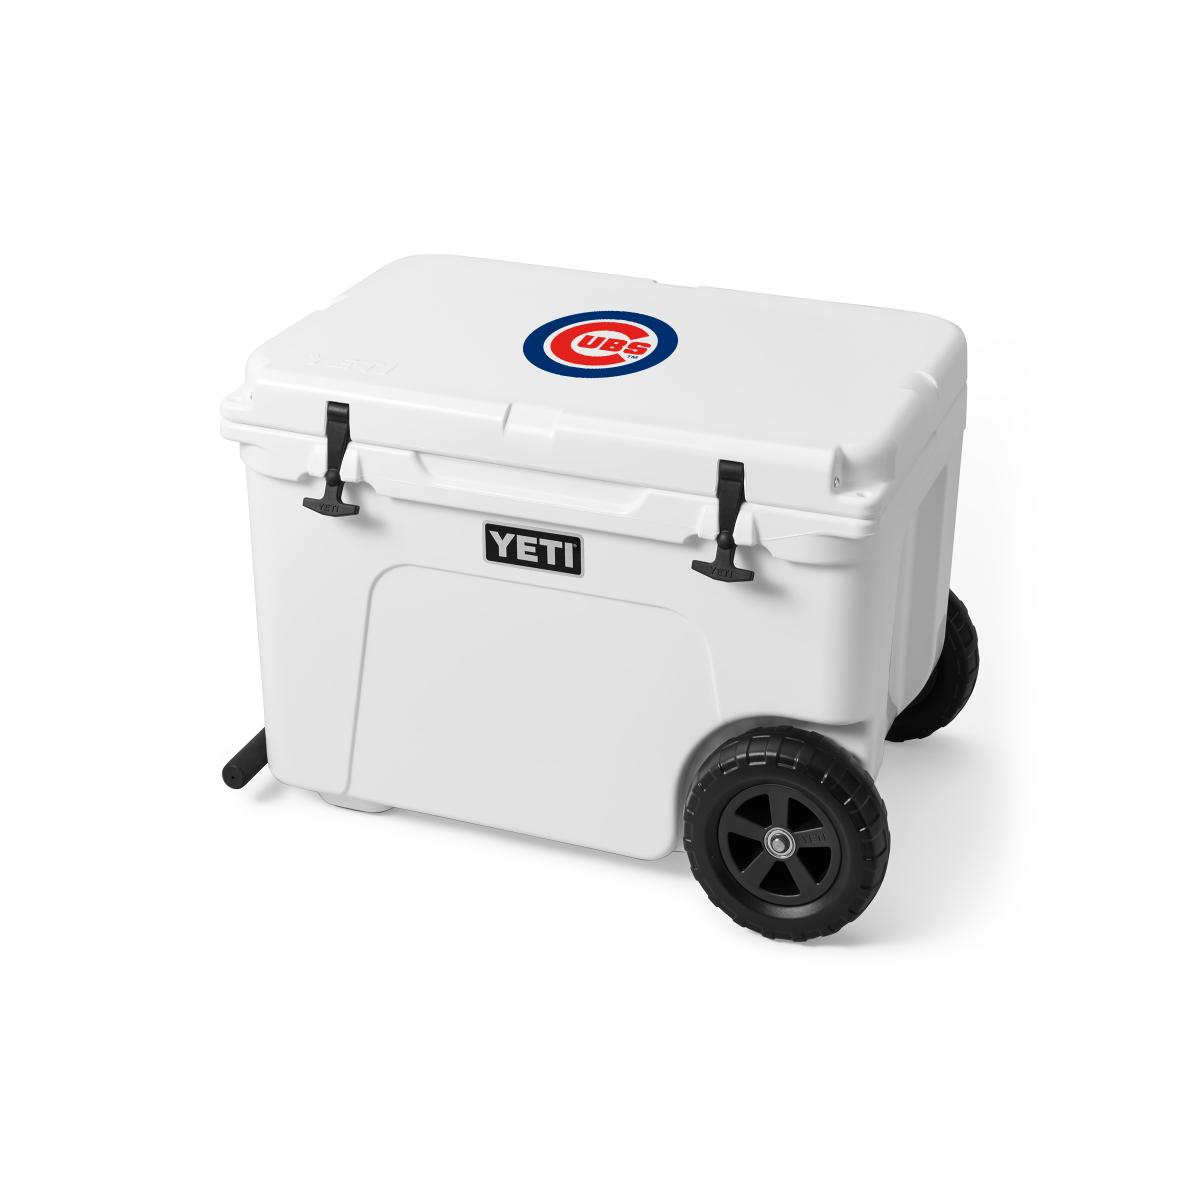 Chicago Cubs Tundra Haul Cooler - $550.00